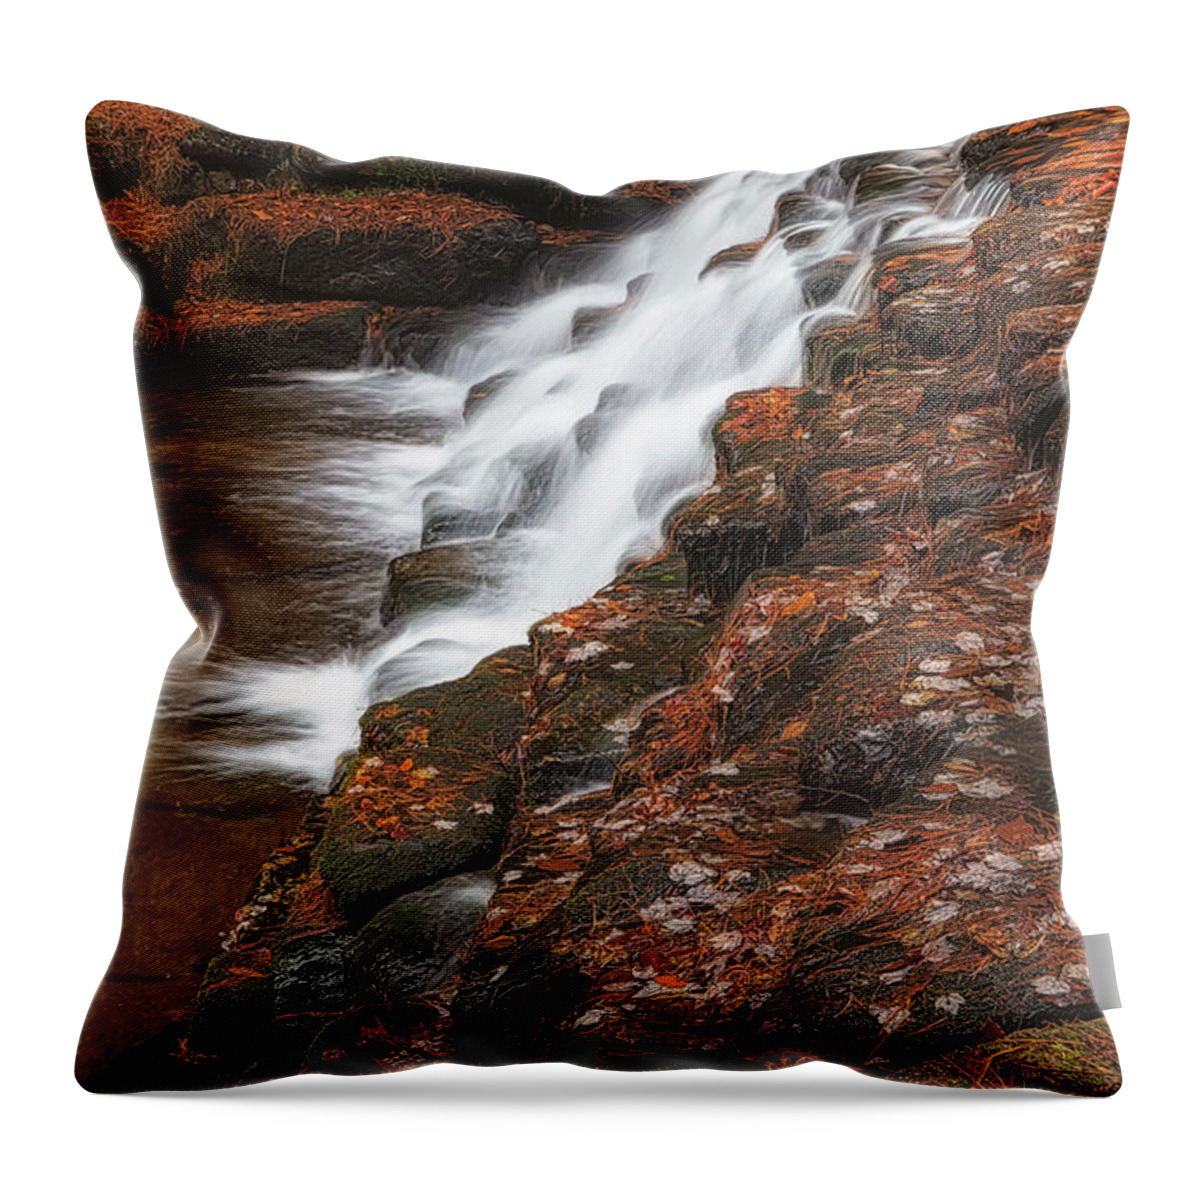 Waterfall Throw Pillow featuring the photograph Cascade And Fall Foliage by Susan Candelario